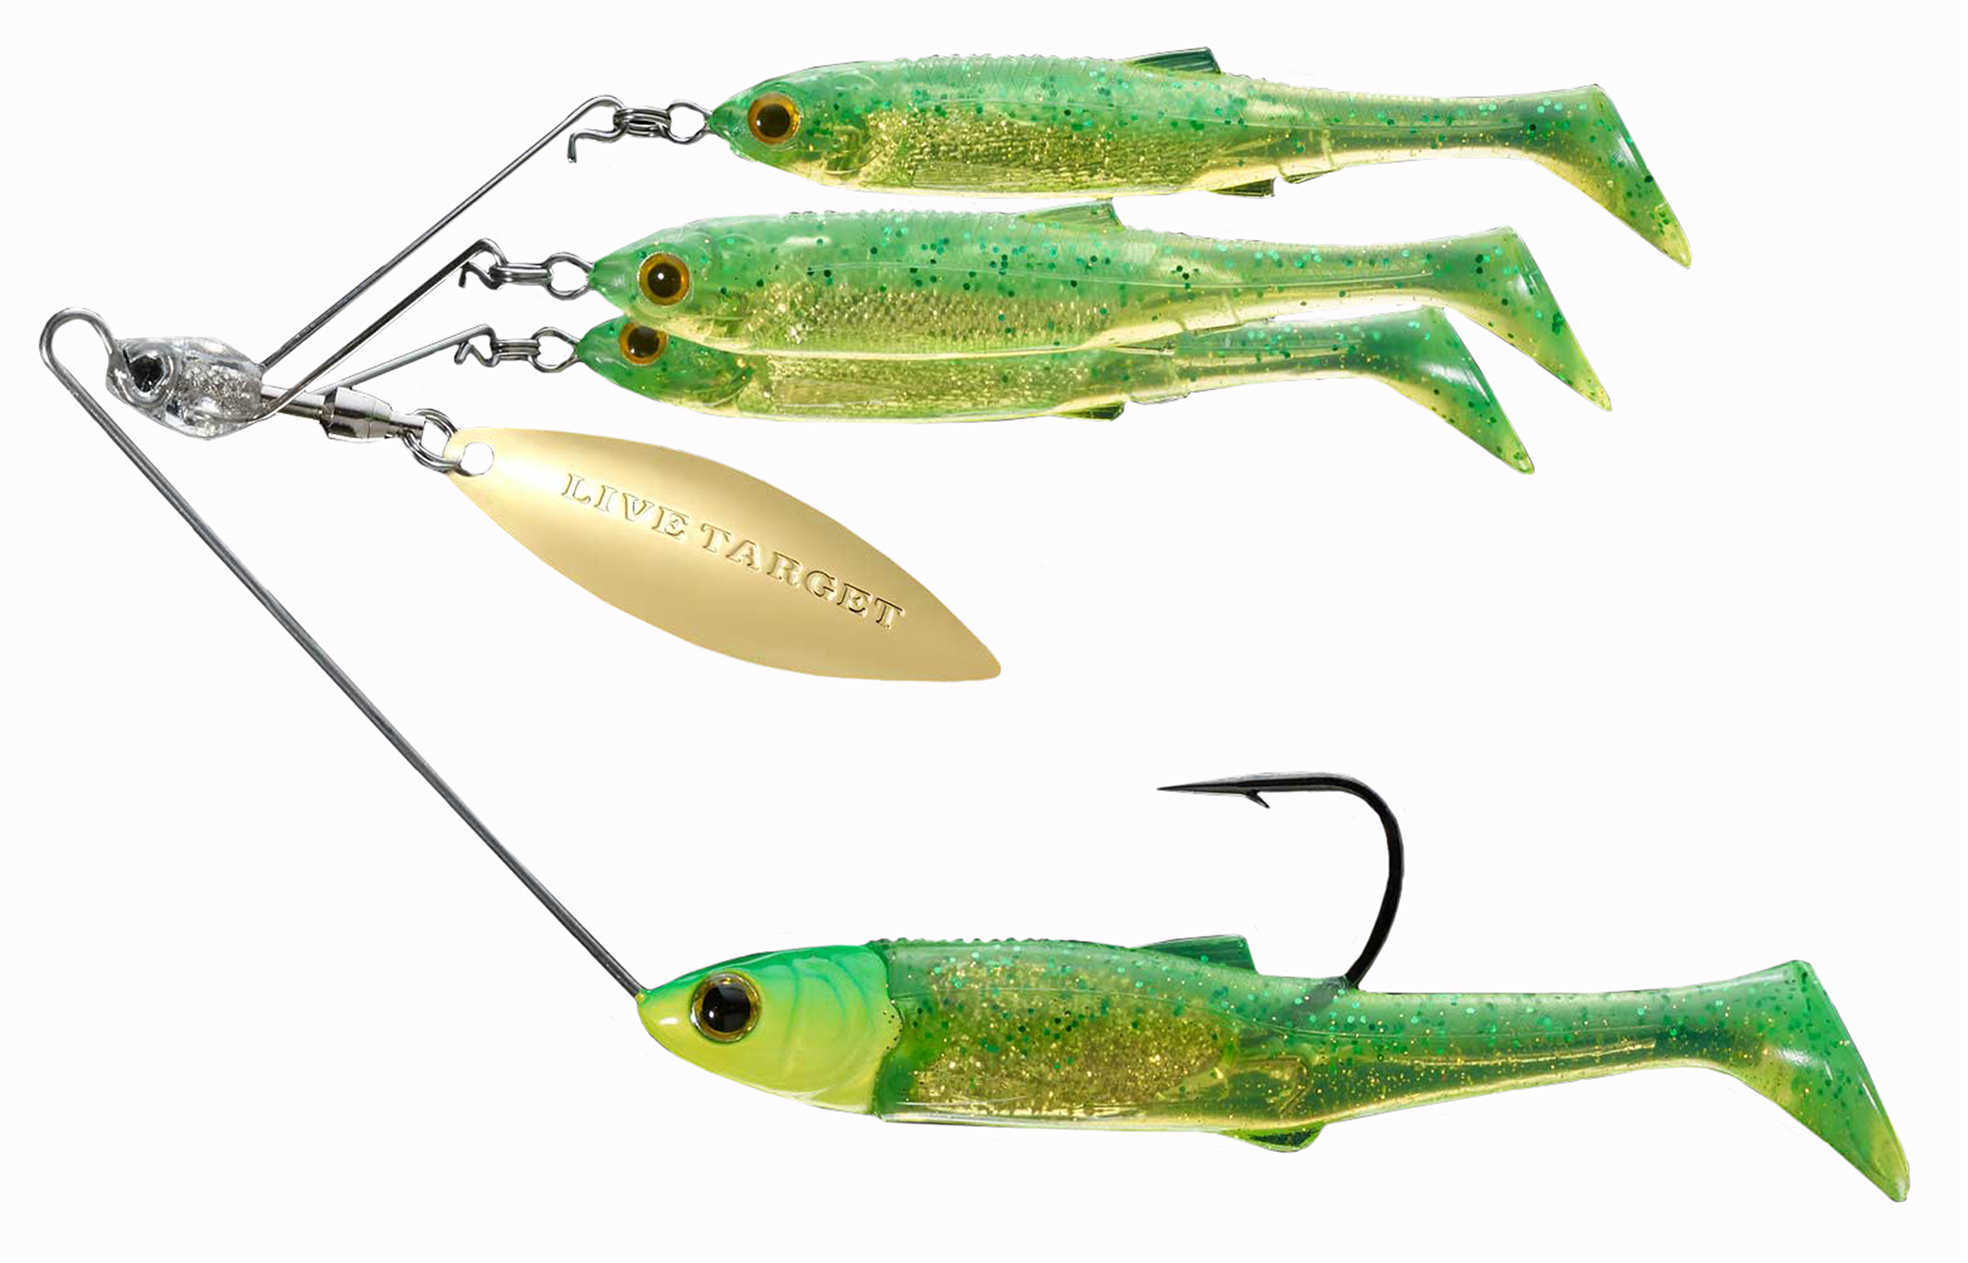 LiveTarget Lures Baitball Spinner Rig Freshwater, Small, 1'-15' Depth, 3/8 oz Weight, Lime Chartreuse/Gold, Per 1 Md: MN